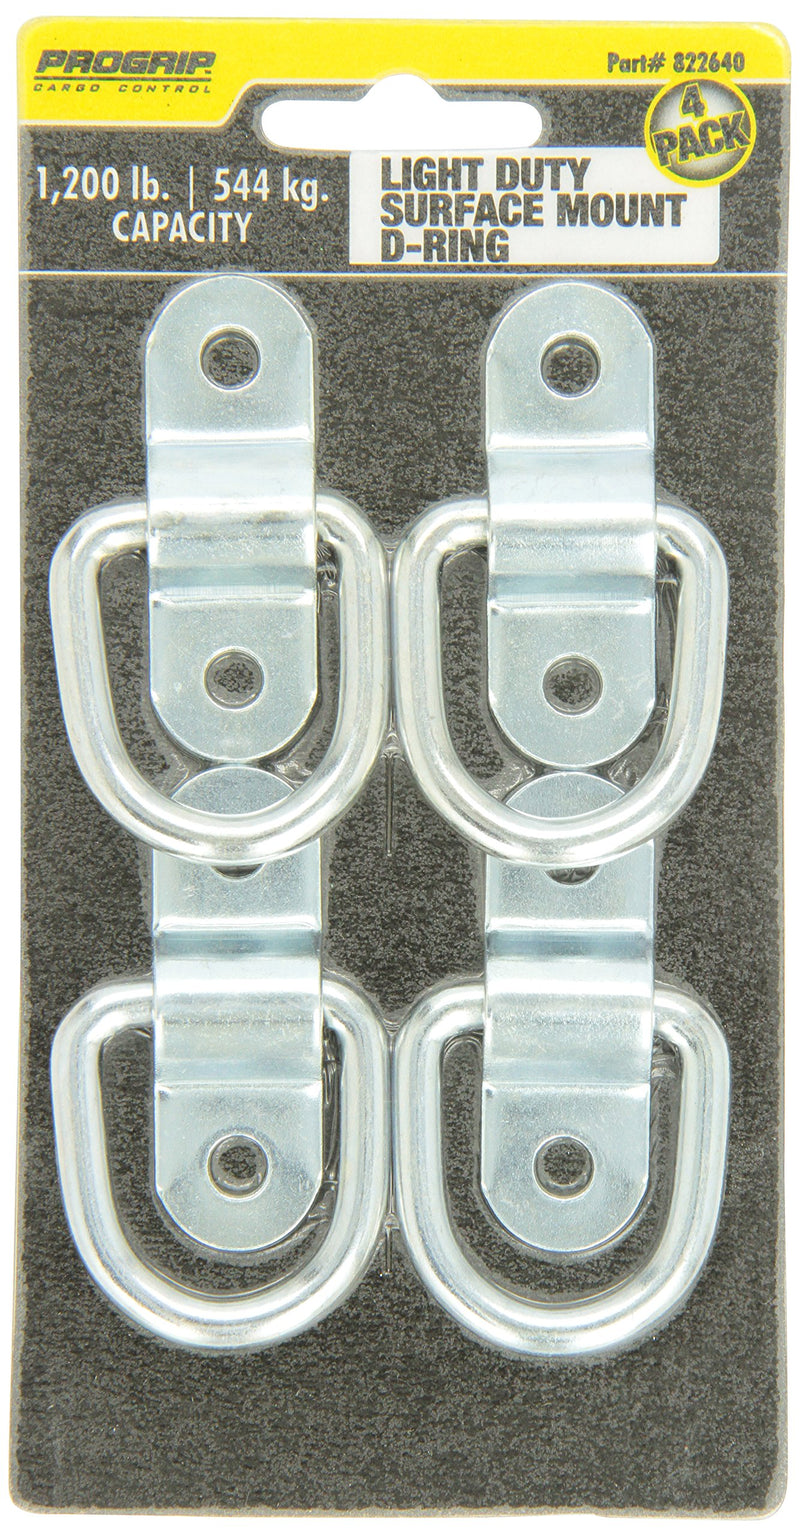  [AUSTRALIA] - PROGRIP 822640 Truck and Trailer Cargo Surface Mount Tie Down with D Ring: Light Duty Strength (Pack of 4)